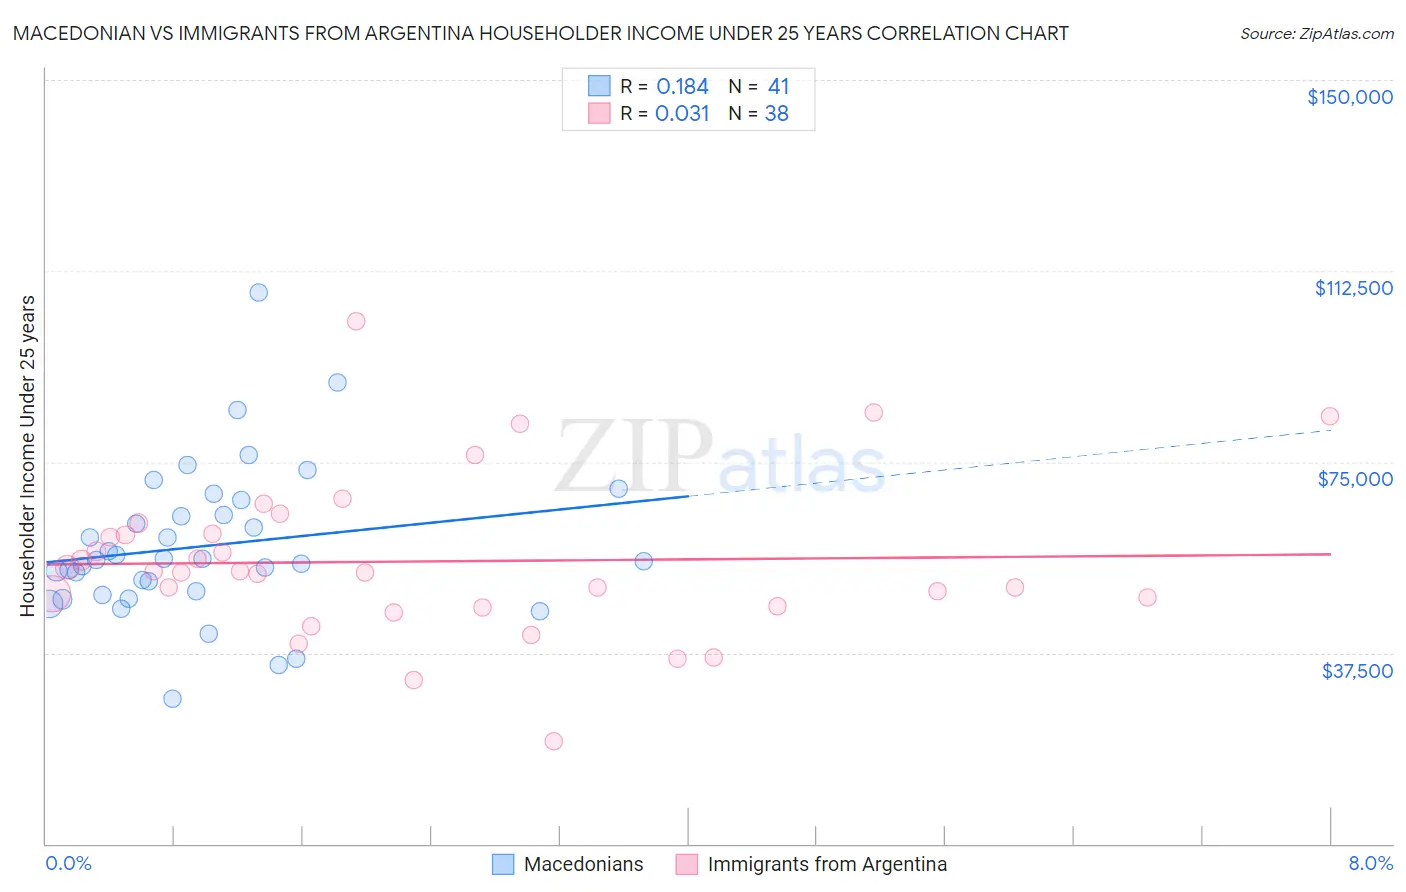 Macedonian vs Immigrants from Argentina Householder Income Under 25 years